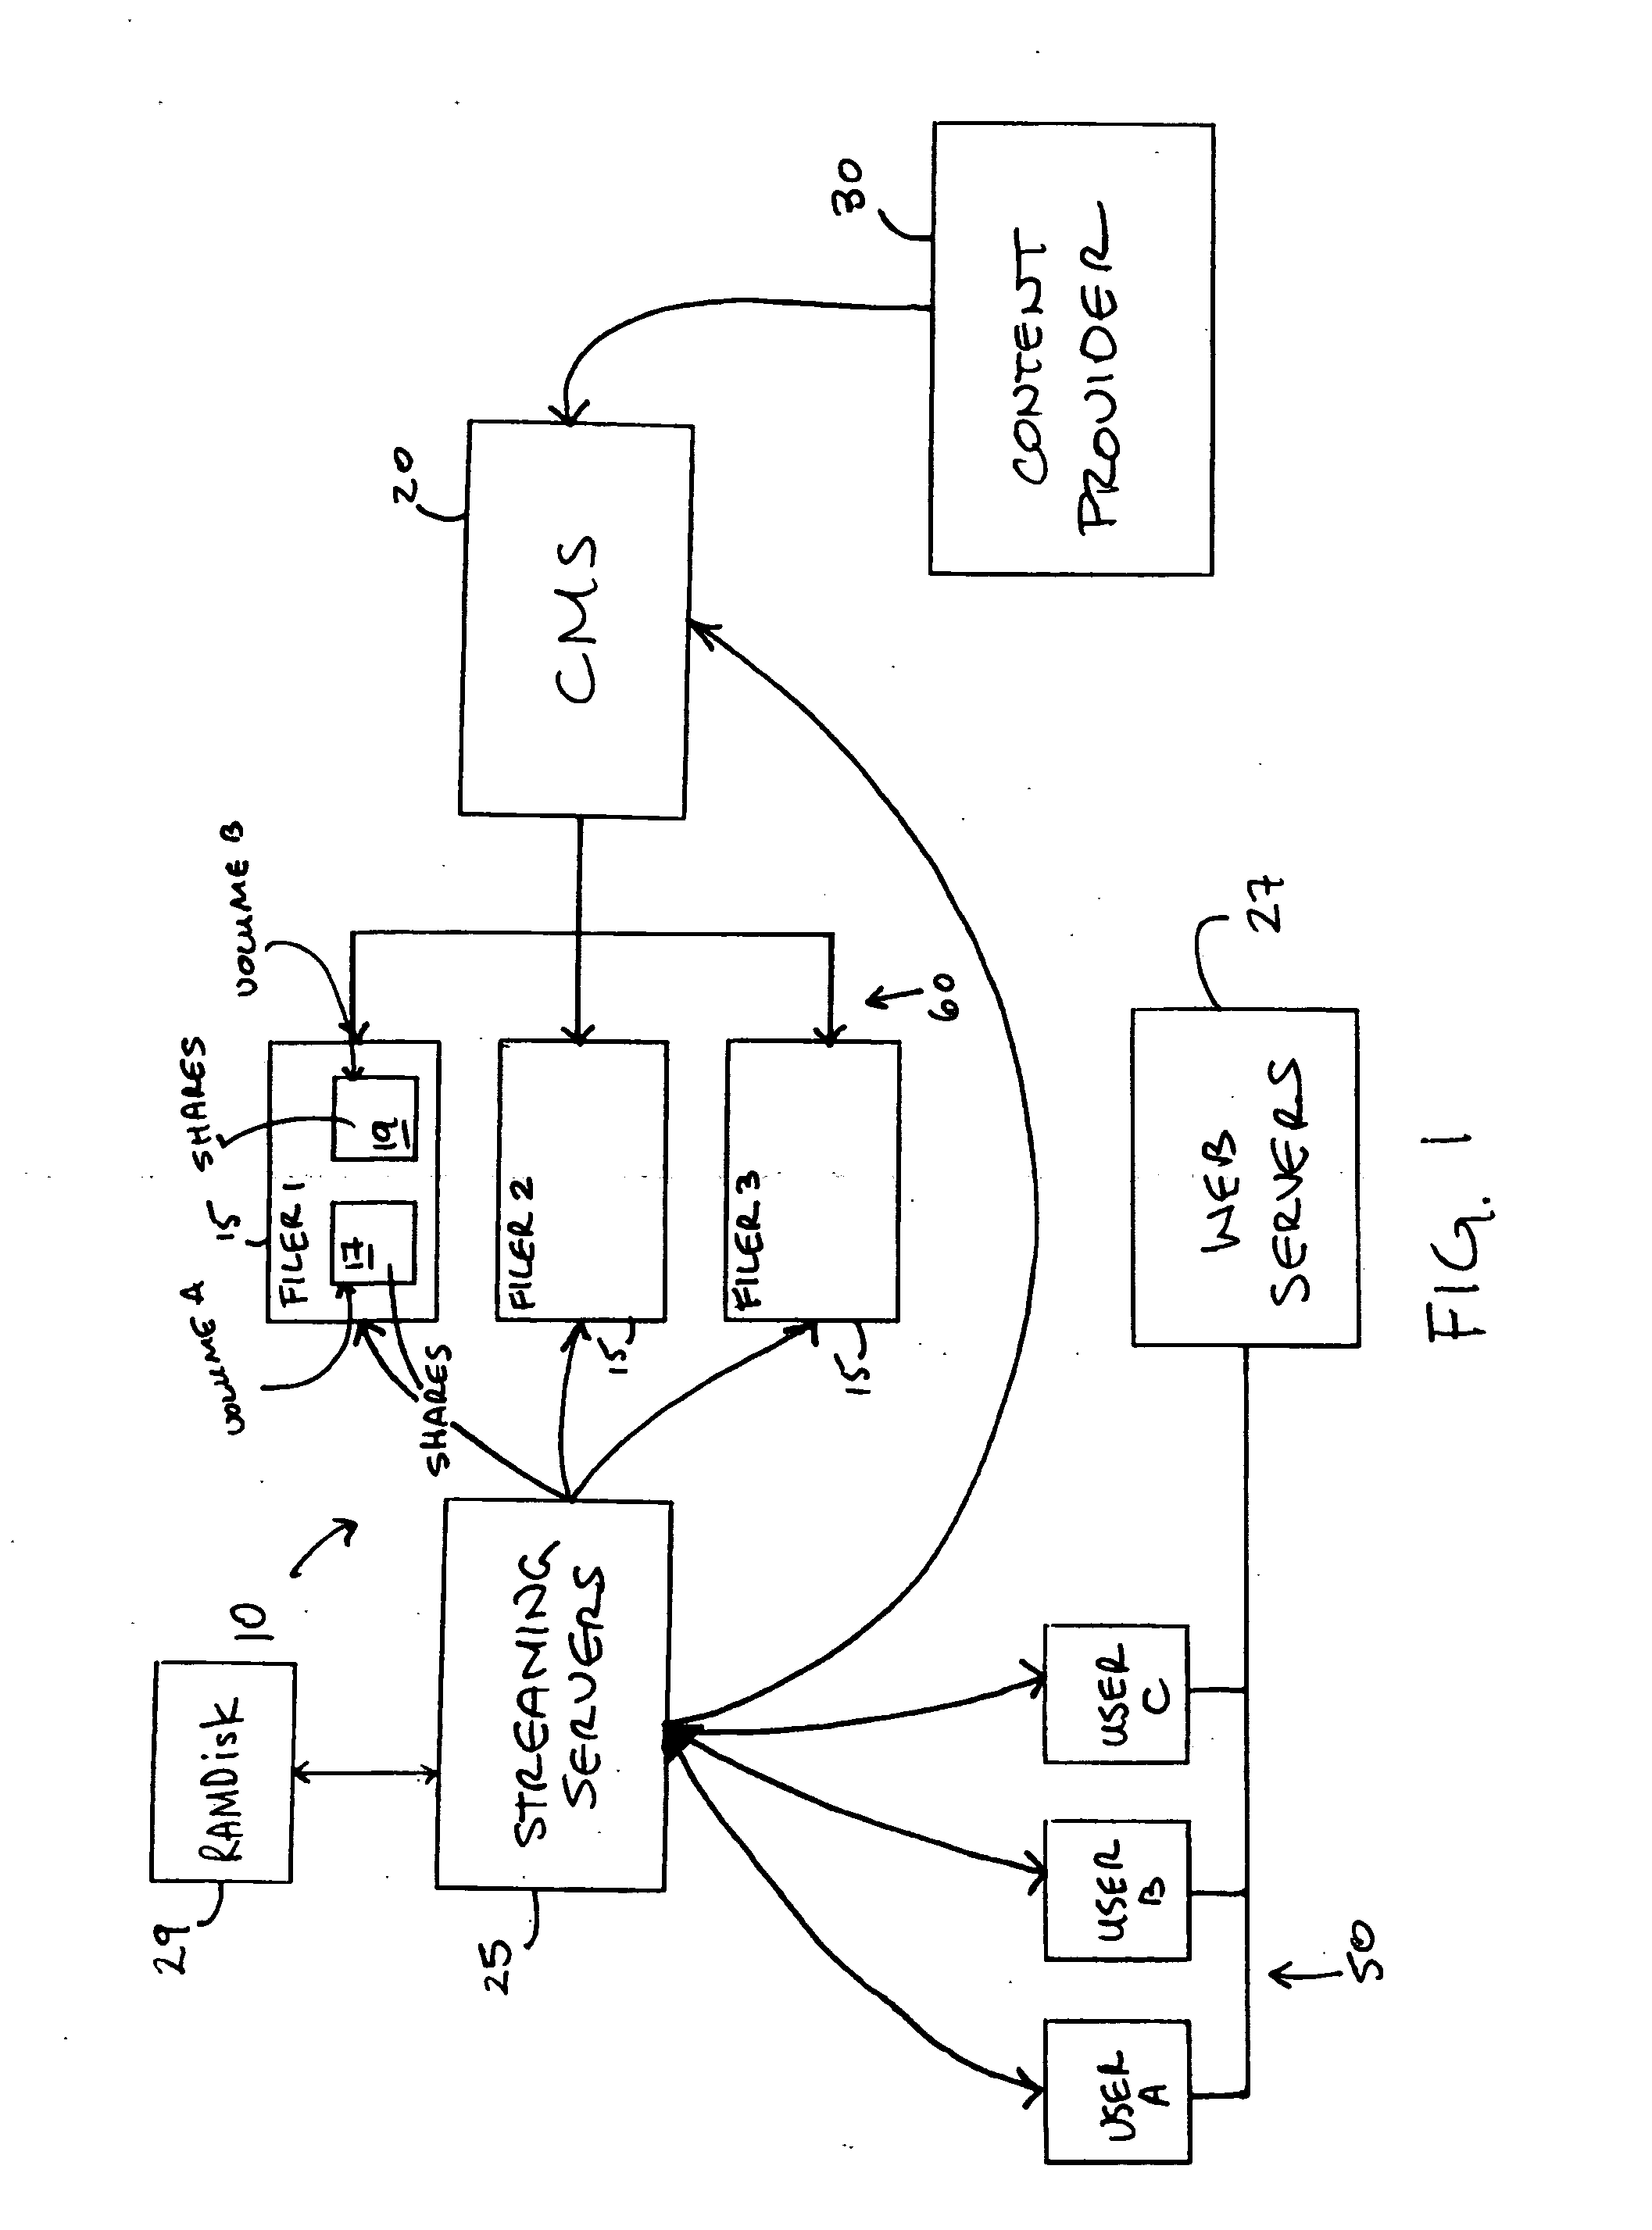 Streaming media content delivery system and method for delivering streaming content